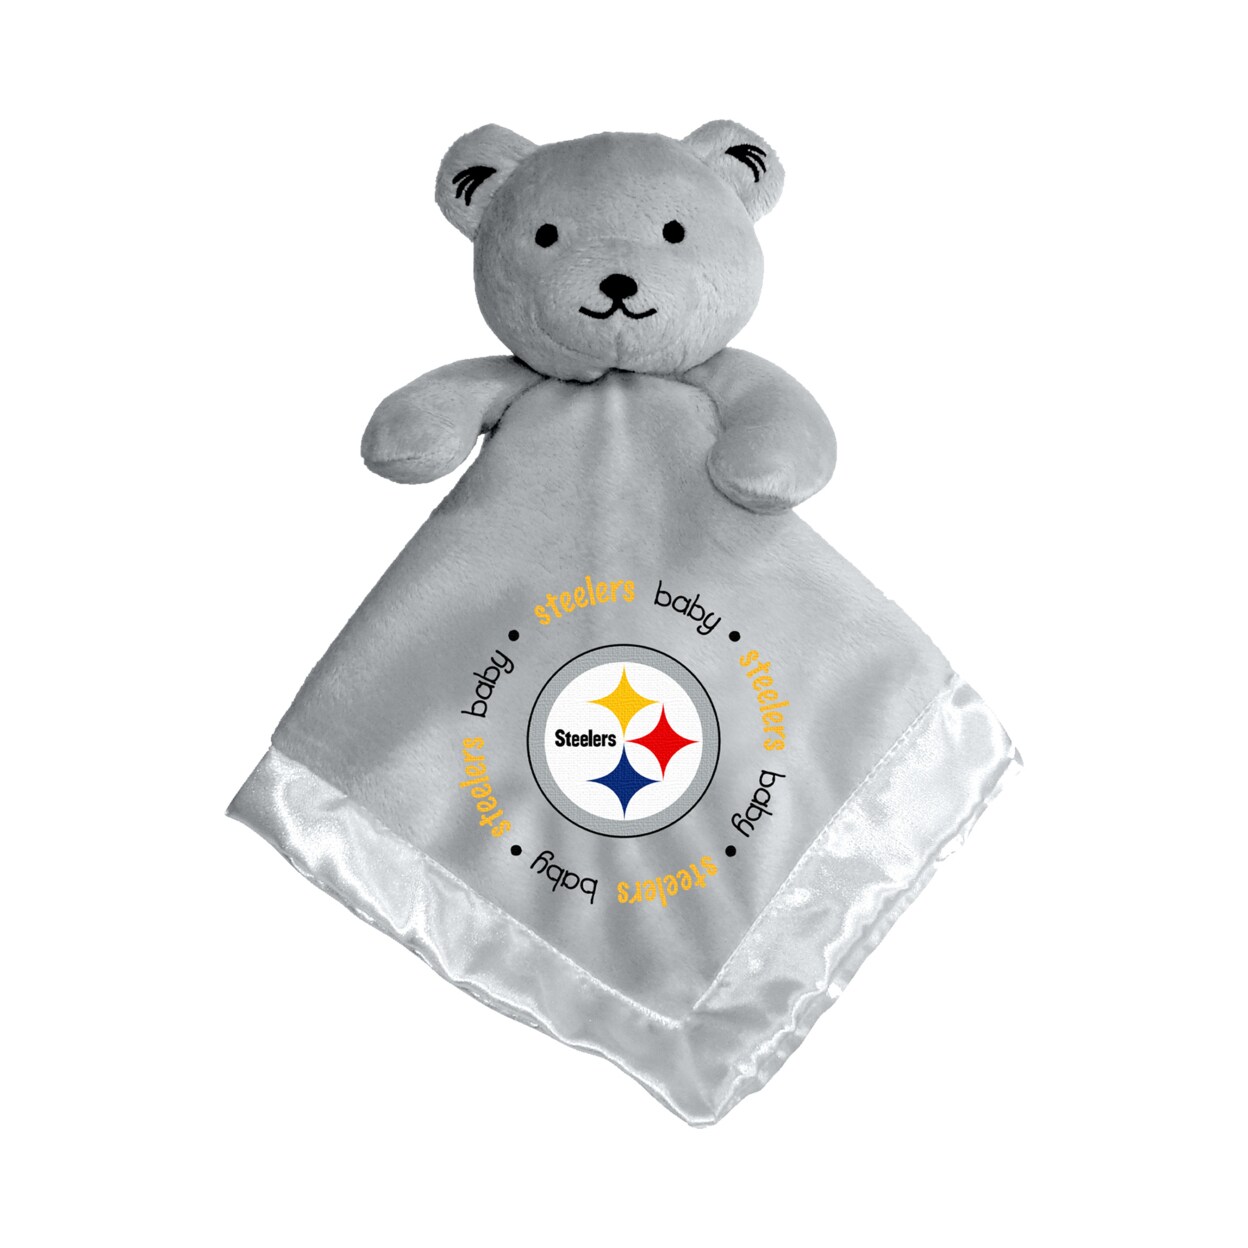 MasterPieces Baby Fanatic Gray Security Bear - NFL Pittsburgh